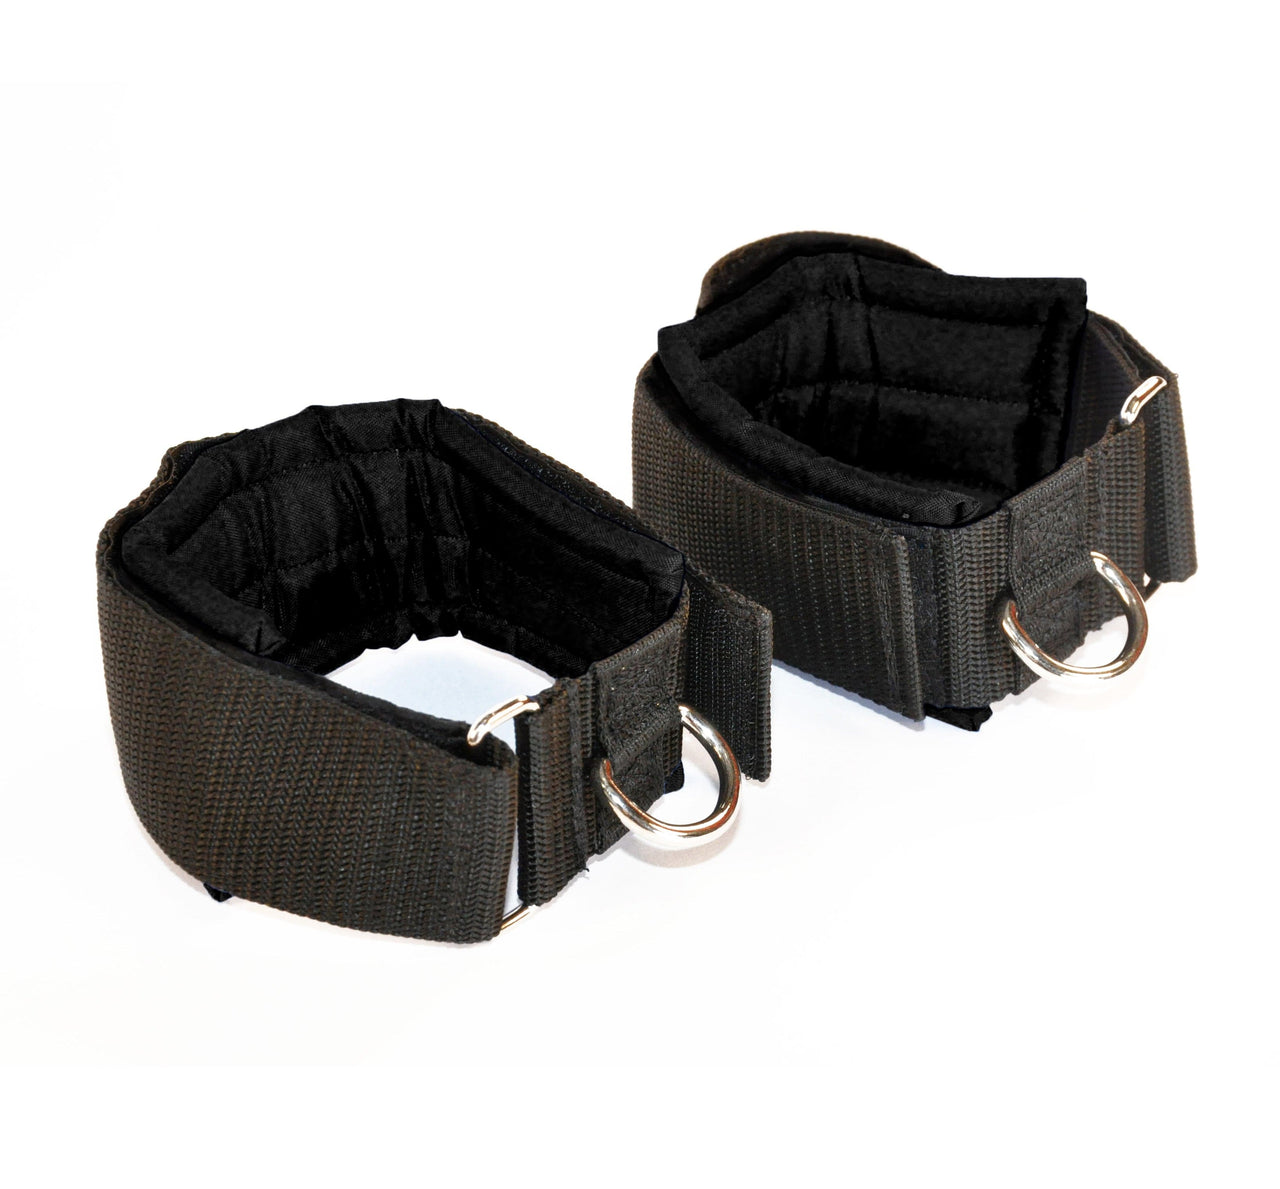 Padded adjustable ankle cuffs for Athletes of all ages in all sports. Designed to attach resistance bands for strength training.